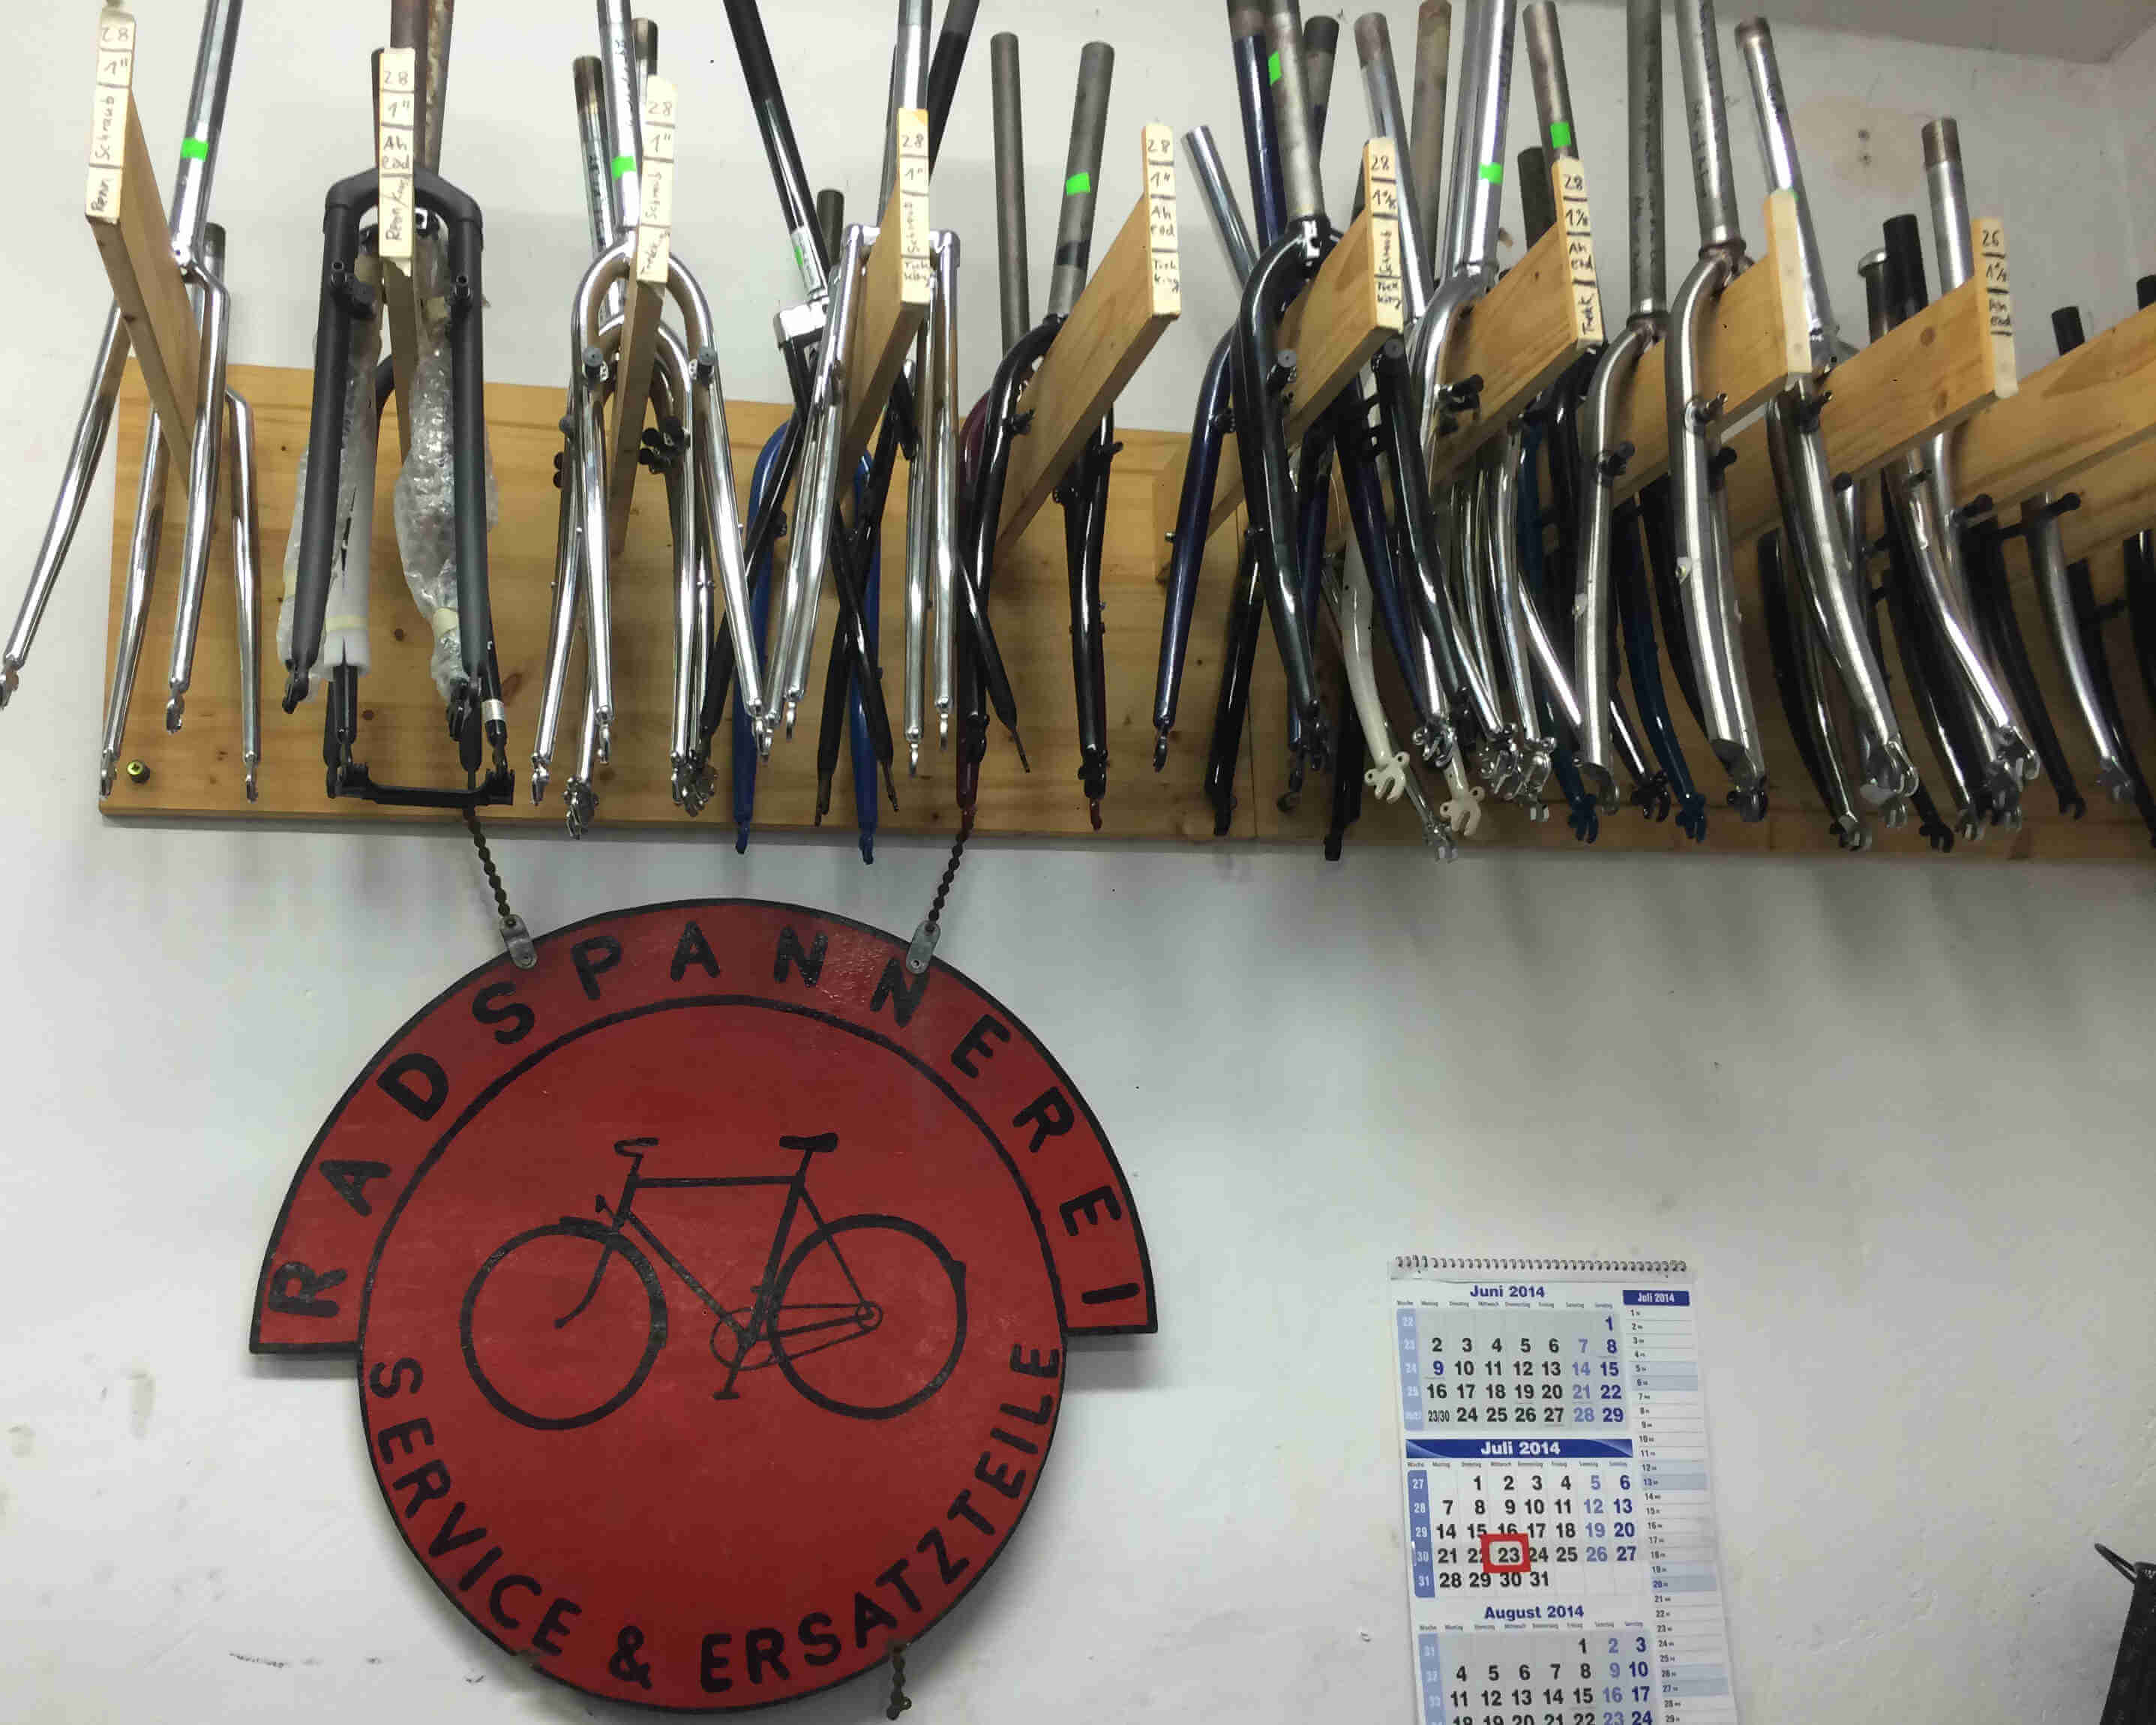 Upward, front view of a rack, full of bike forks, mounted to a wall with a Radspannerei sign below it